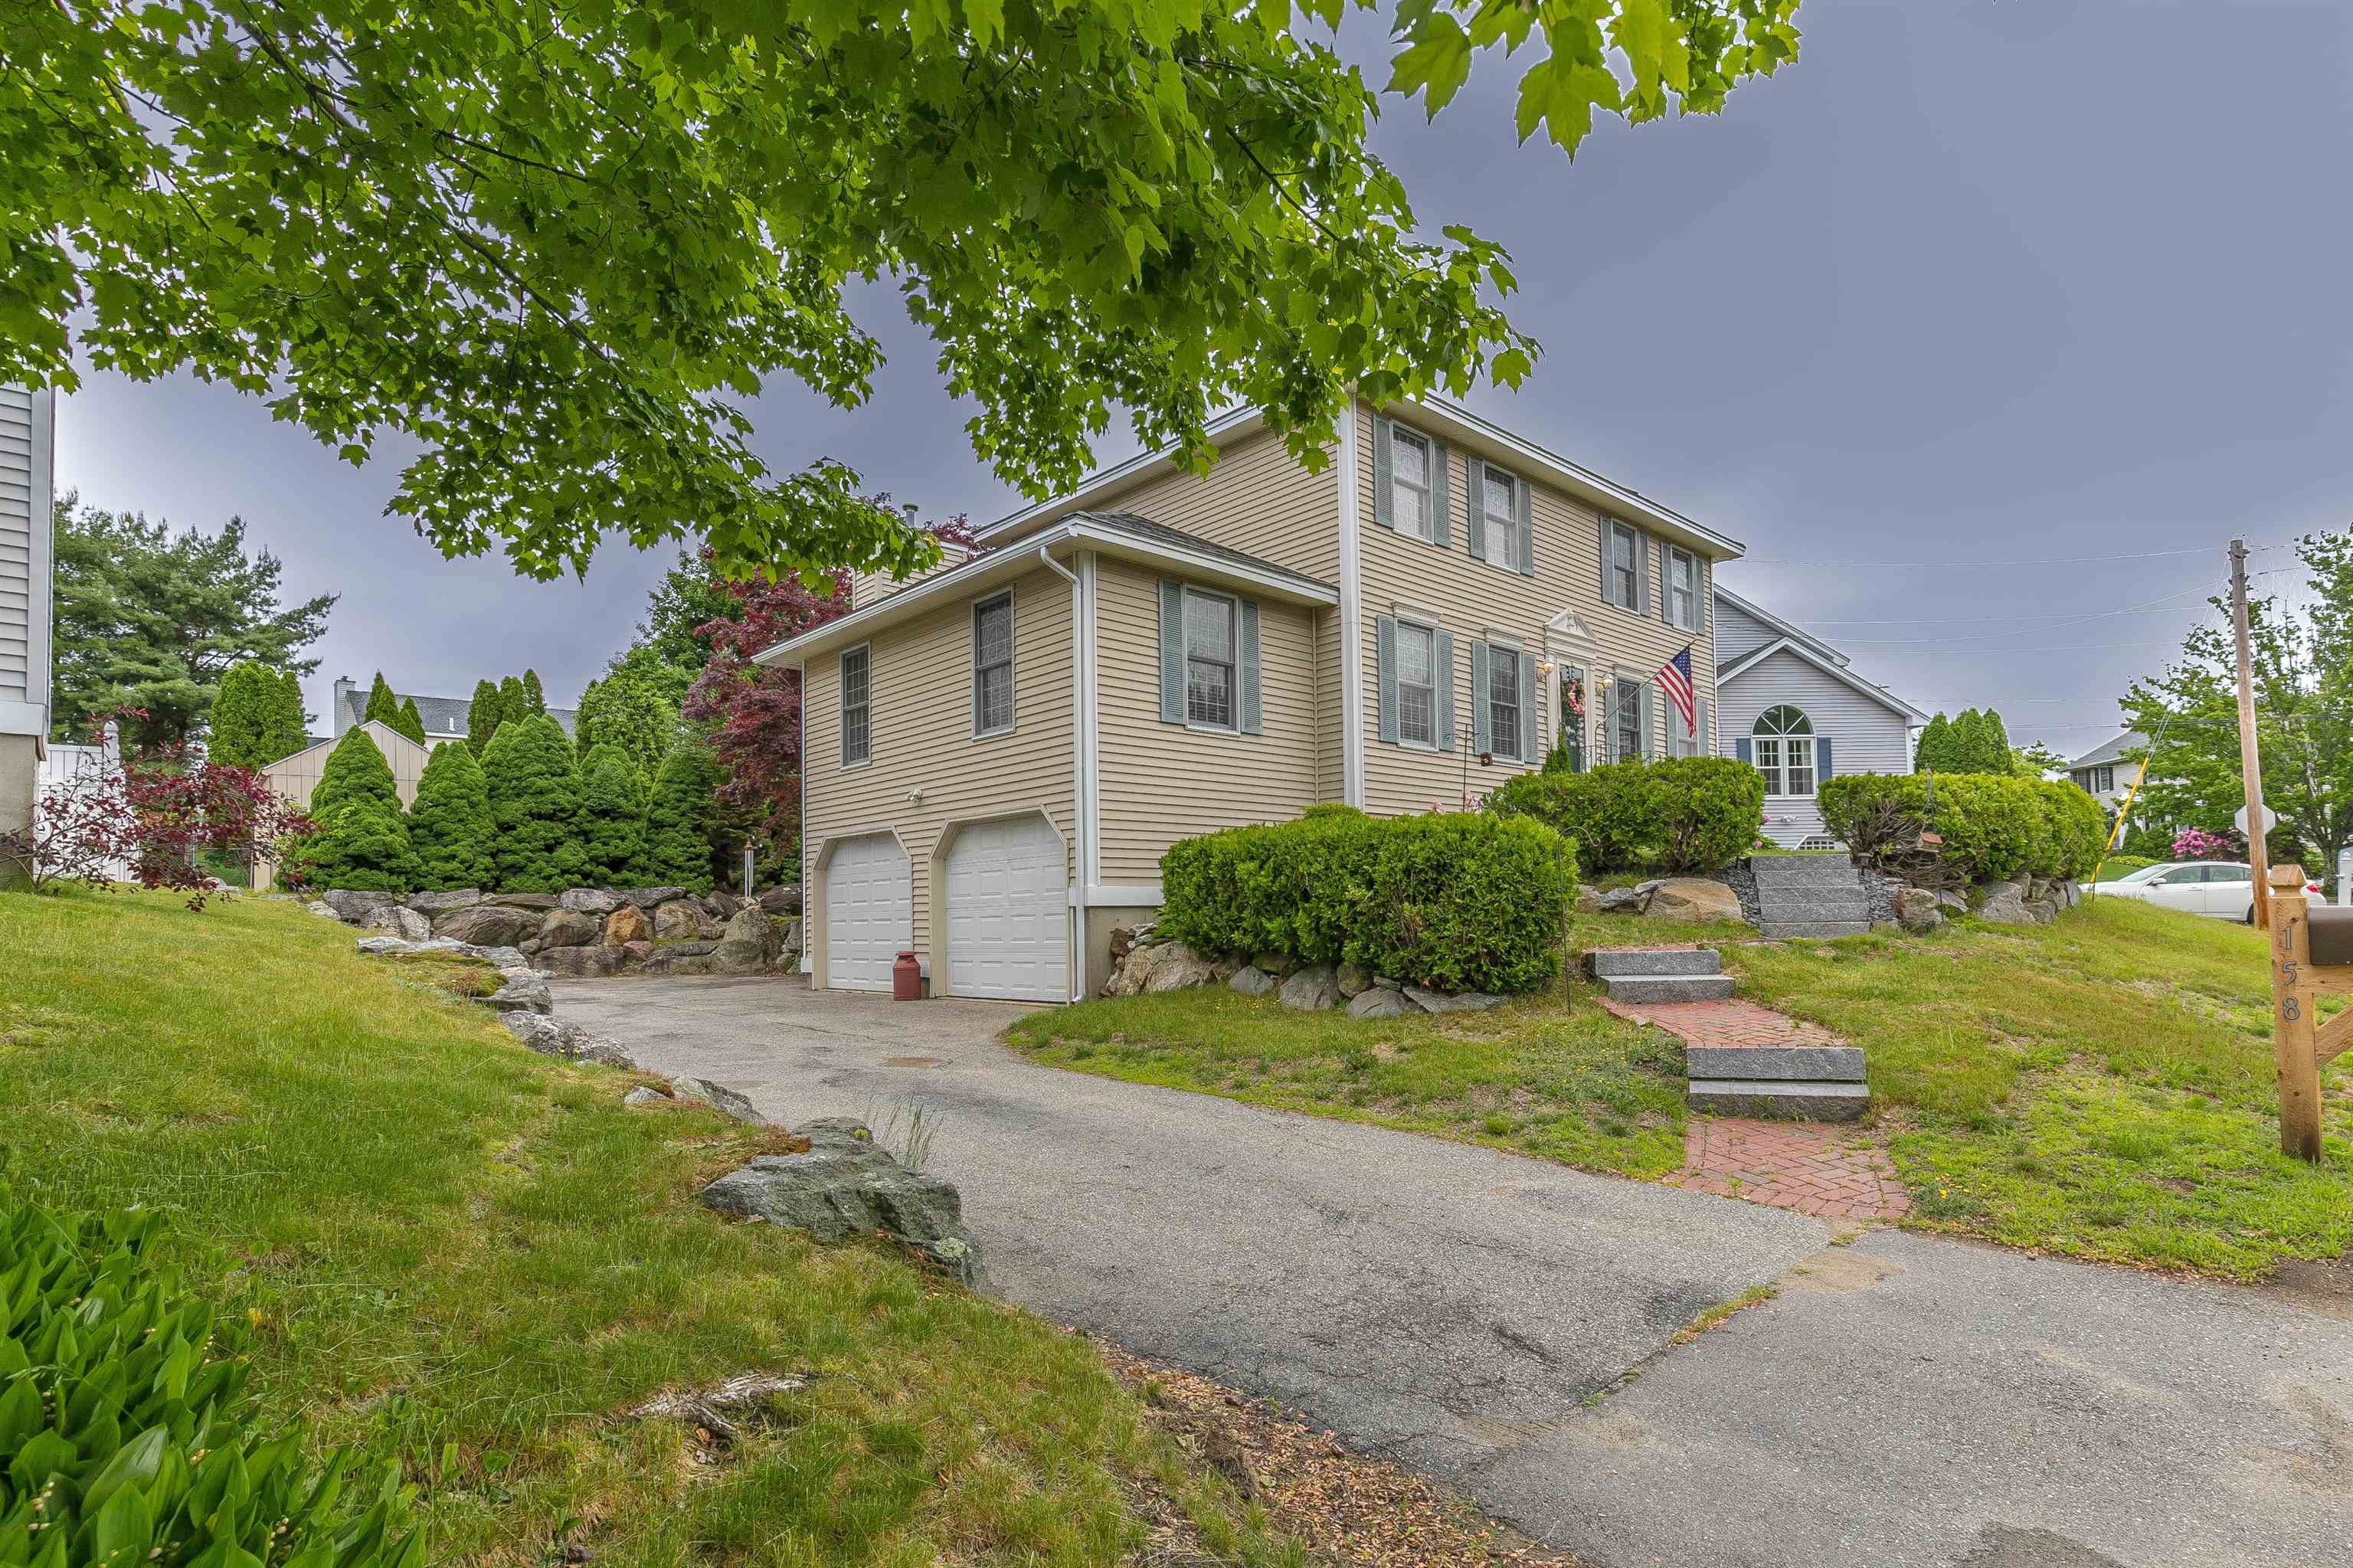 158 Aaron Drive Manchester, NH Photo